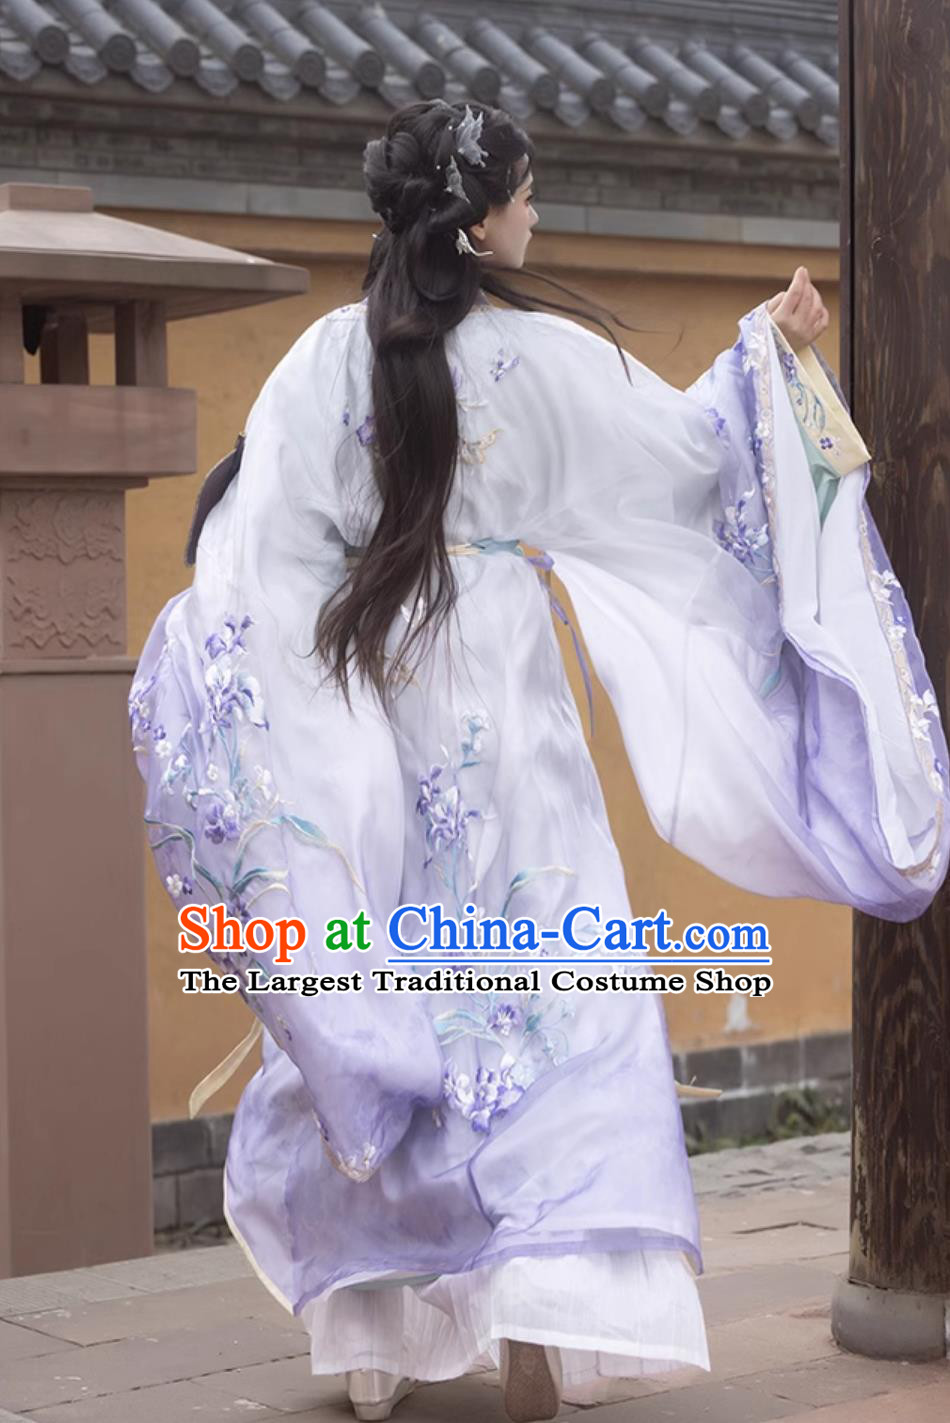 Traditional Han Dynasty Princess Purple Dresses Ancient Chinese Woman Costumes Hanfu Online Shop